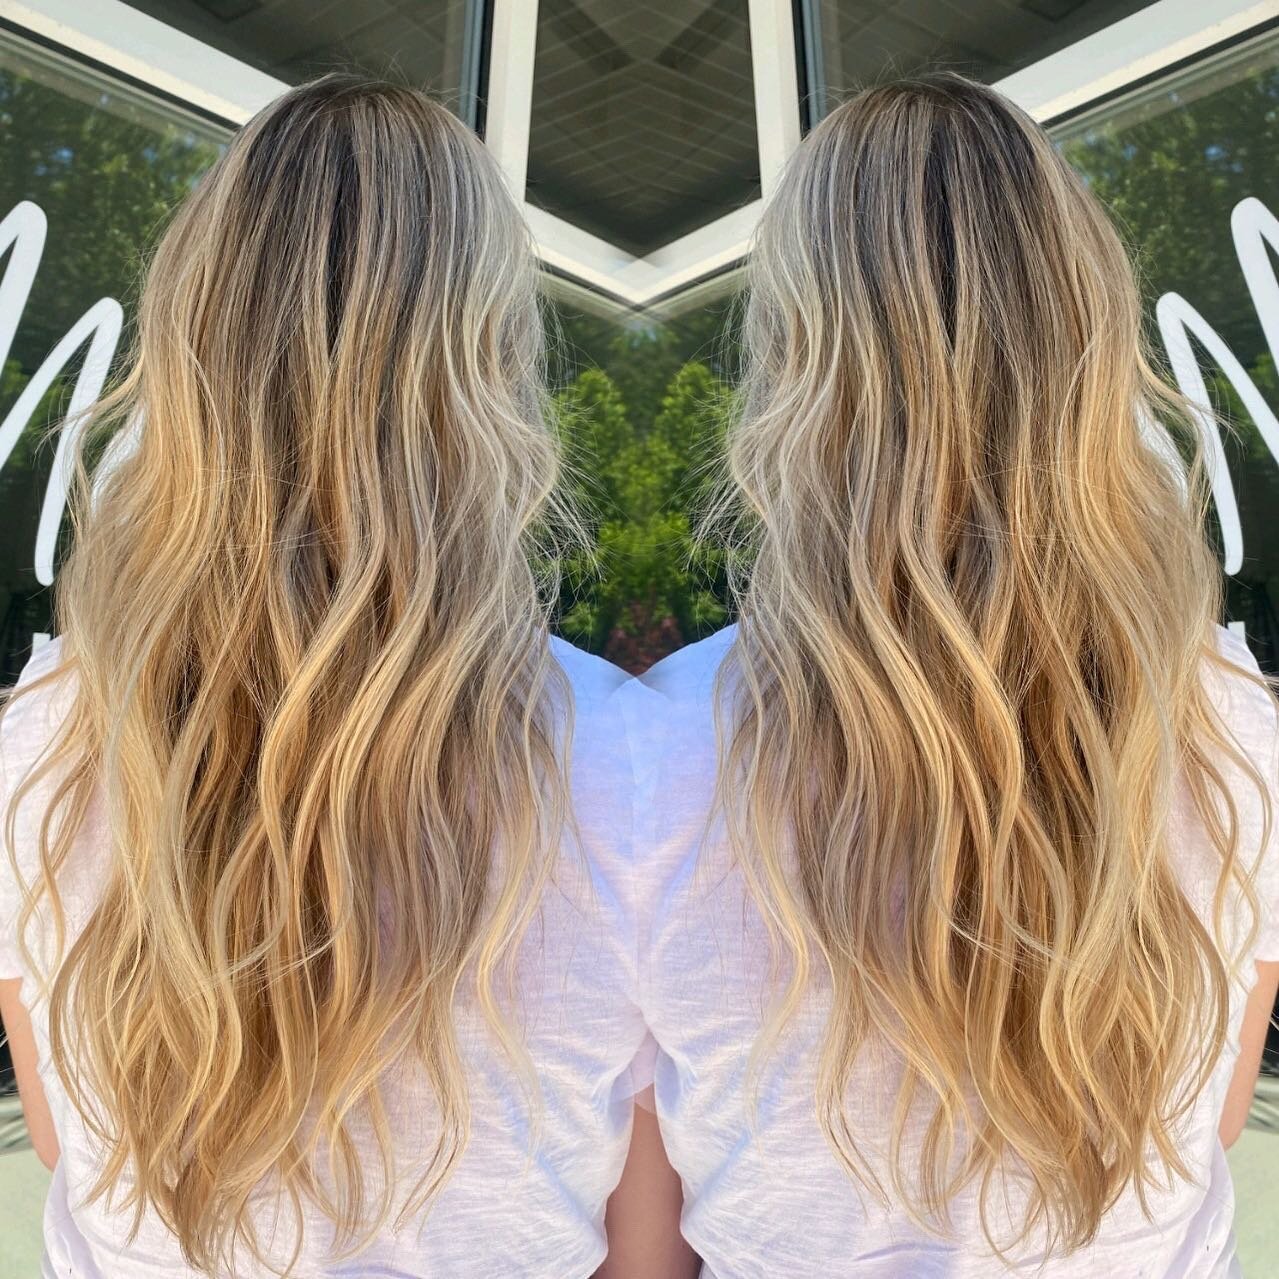 Bright Blonde at Beau Monde🌻

&bull;Flourish Hair Lounge conveniently the first suite when you walk in the door of the beautiful @beaumondesalonsuites in downtown Holly Springs&bull;